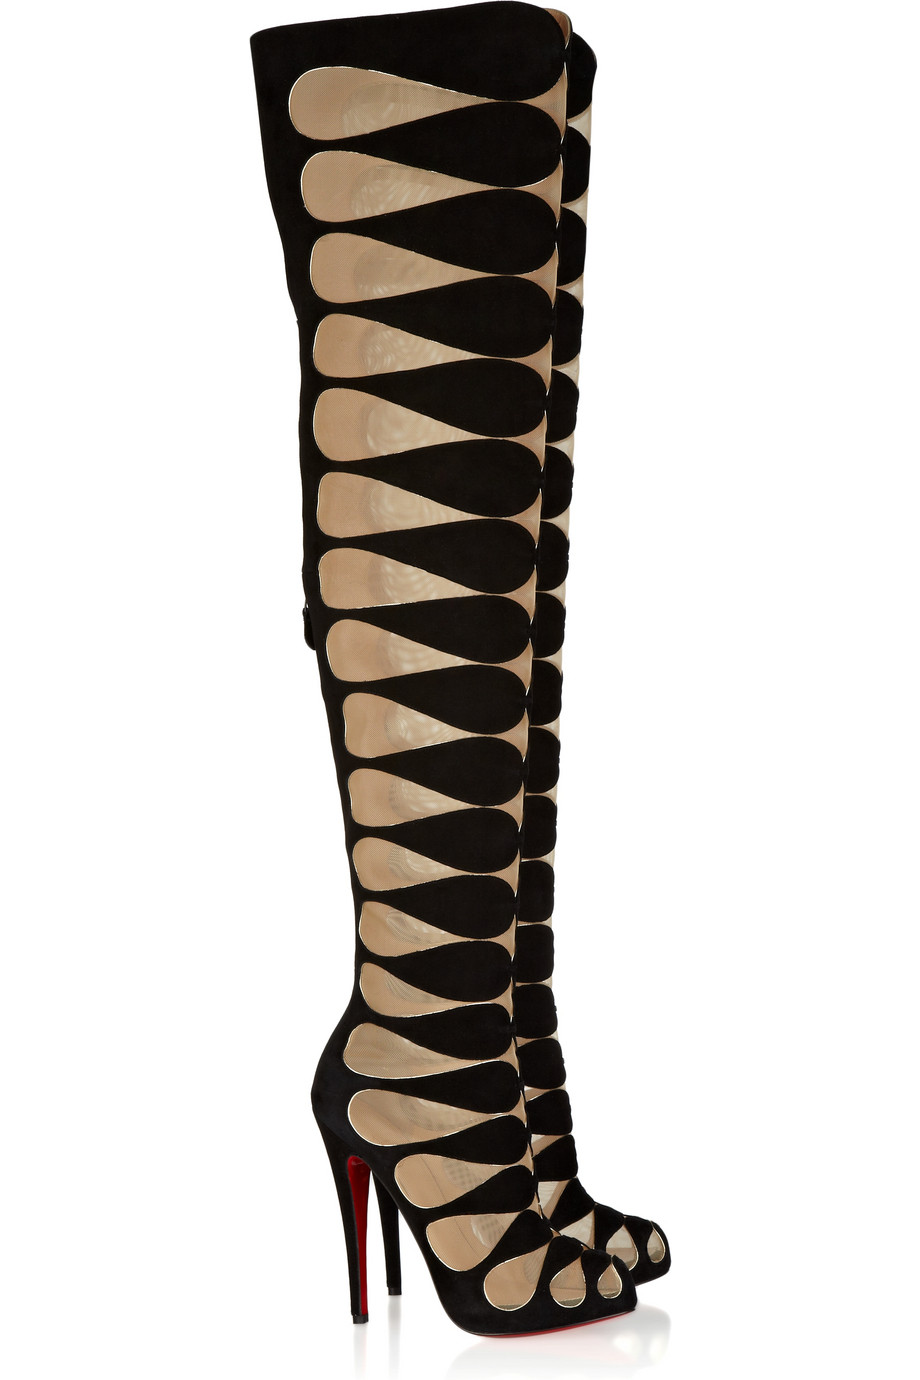 replica christian - Christian louboutin Lola Montes 140 Cutout Suede Thigh Boots in ...